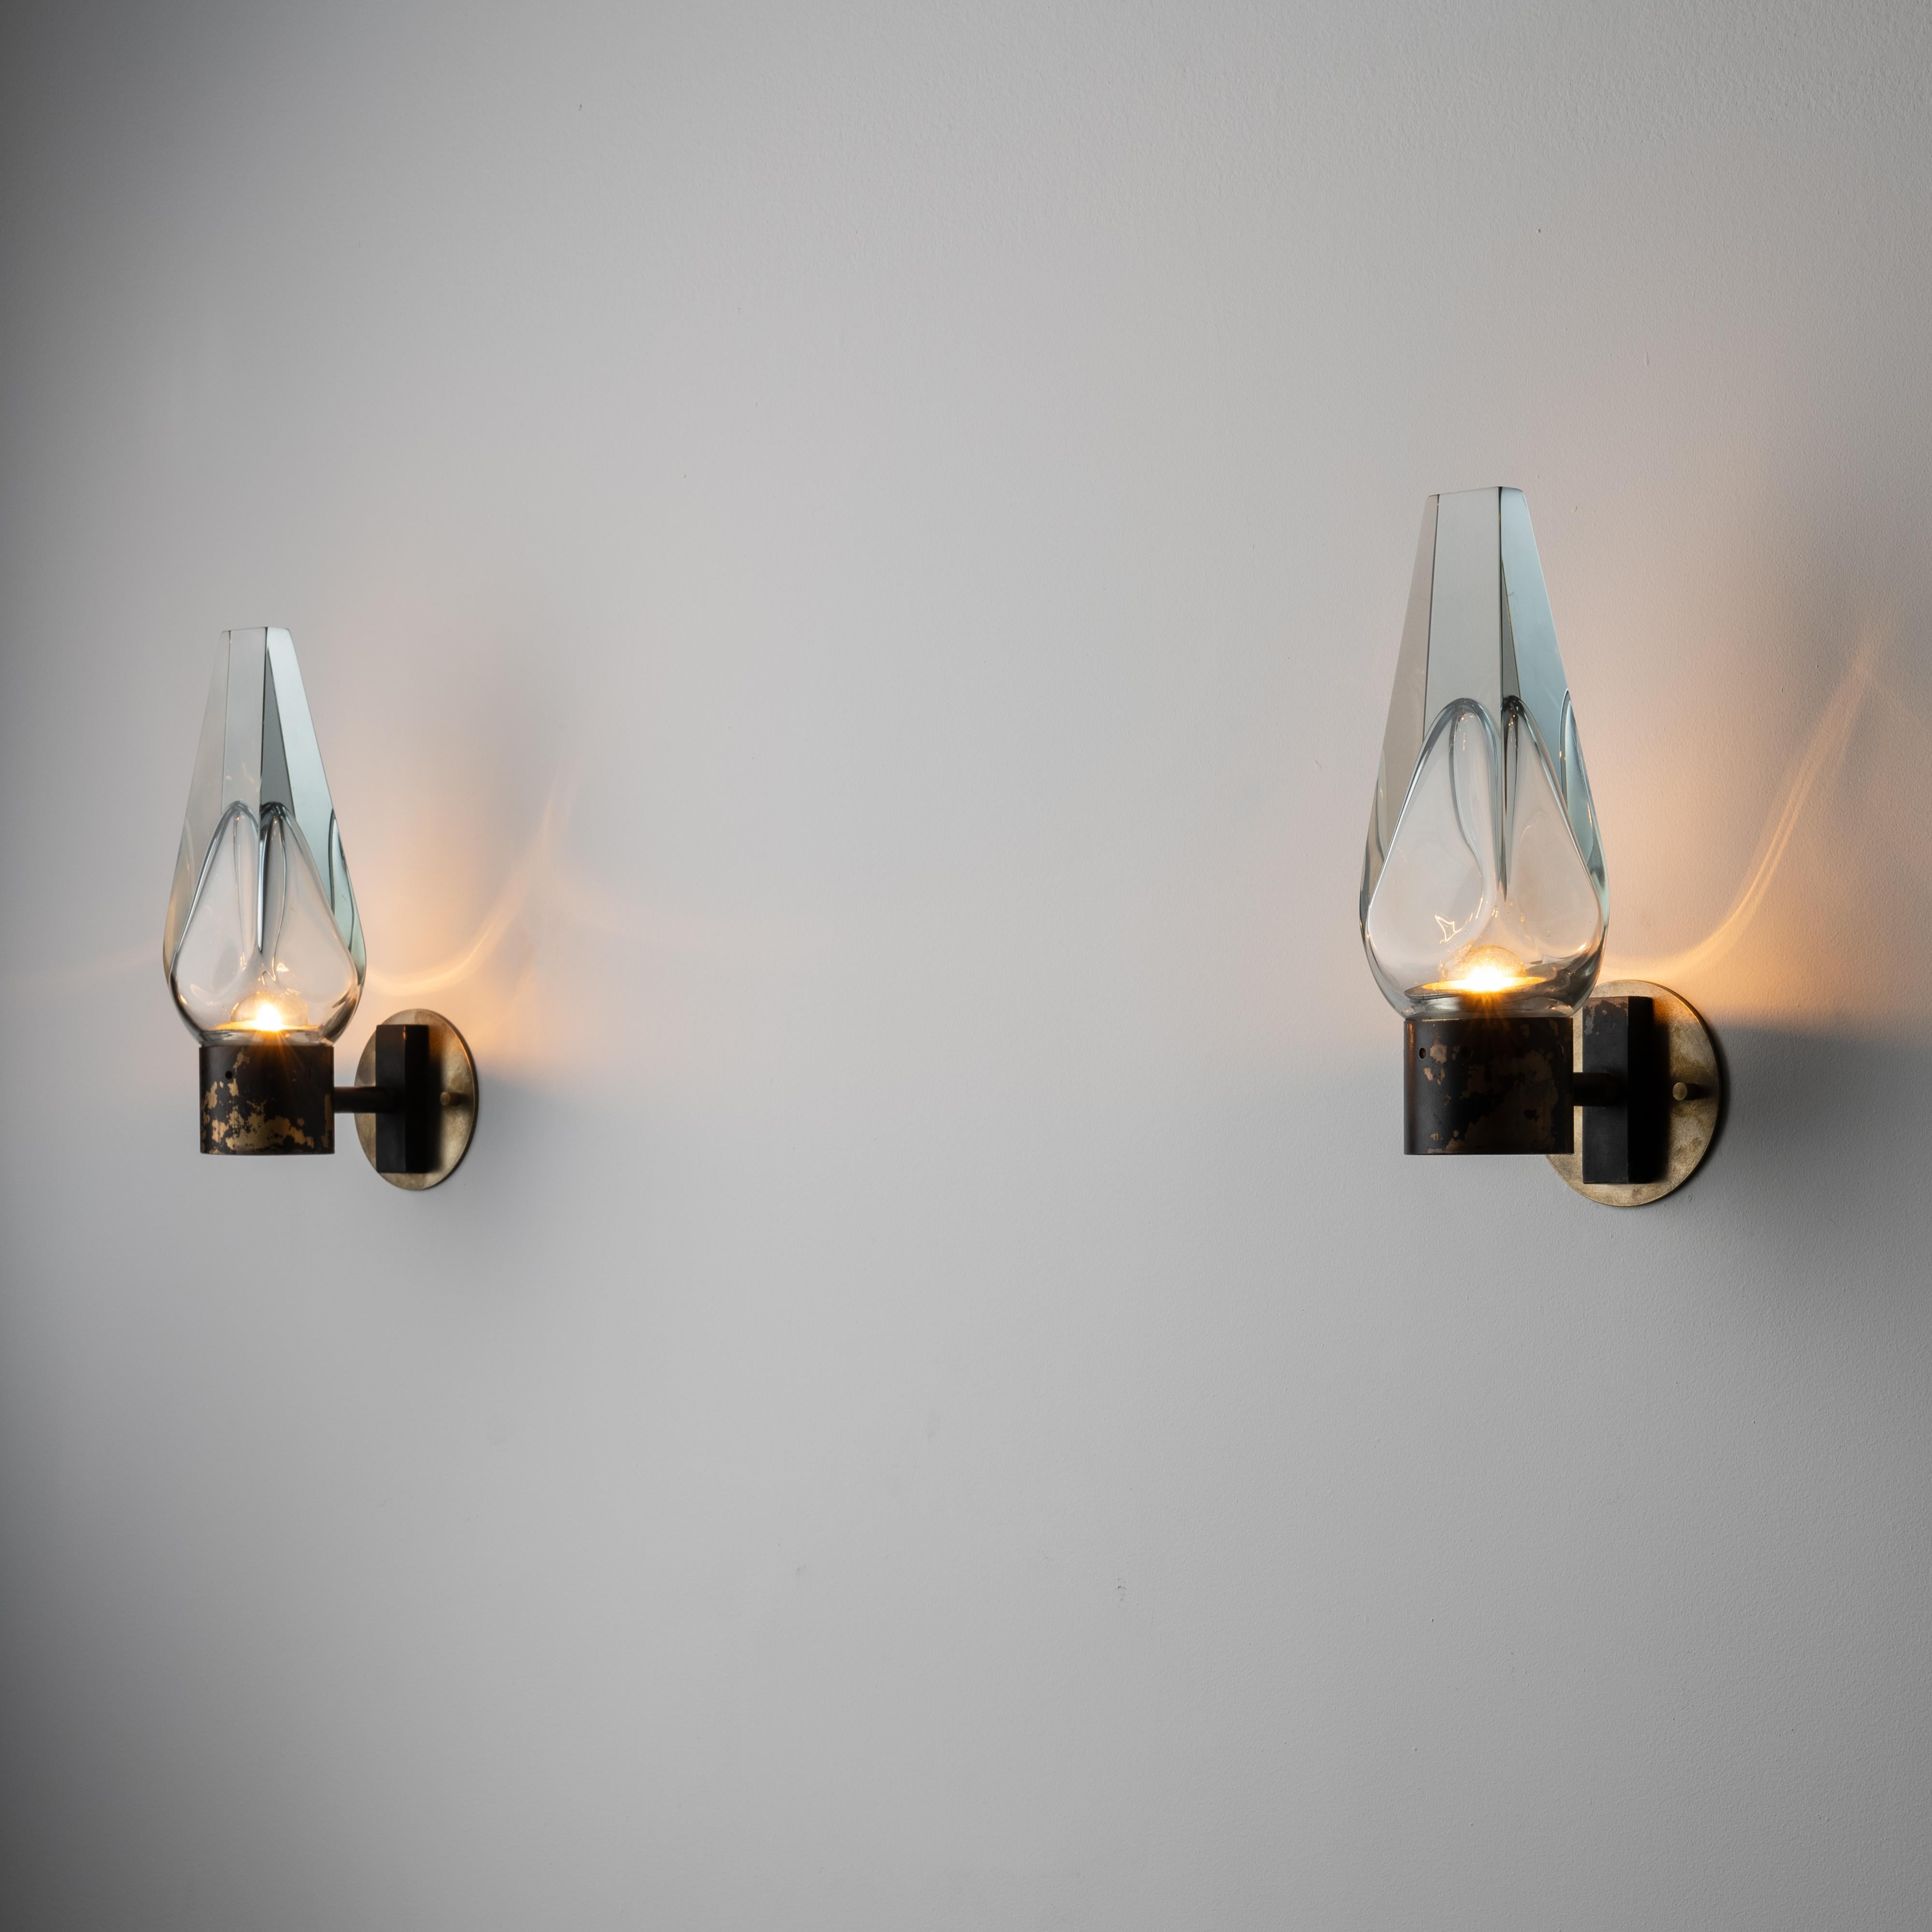 Sconces by Flavio Poli for Seguso. Designed and manufactured in Italy, circa the 1960s. Beautiful thick tapered glass are the main focus of these sconces. The glass has a blue hue and a center relief at the bottom for the bulb to shine through. The